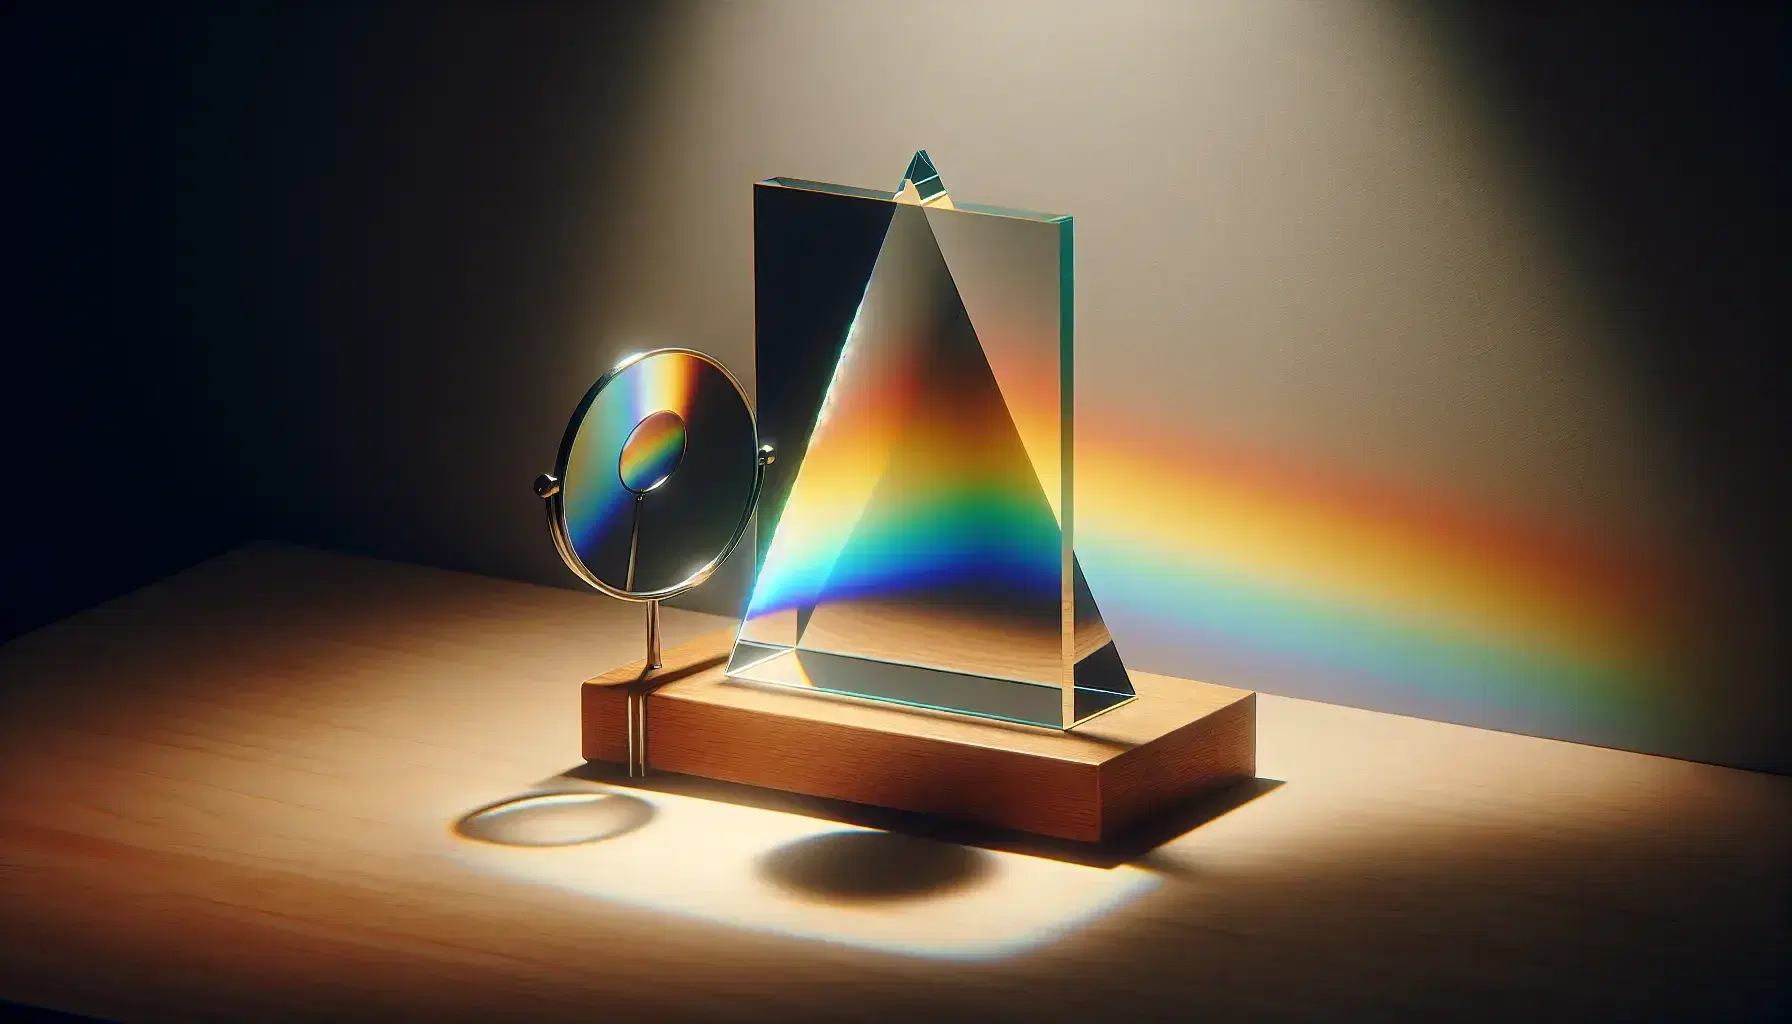 Elegant scientific setup with a glass prism dispersing light into a color spectrum, flanked by a concave mirror and a flat mirror on a wooden table.